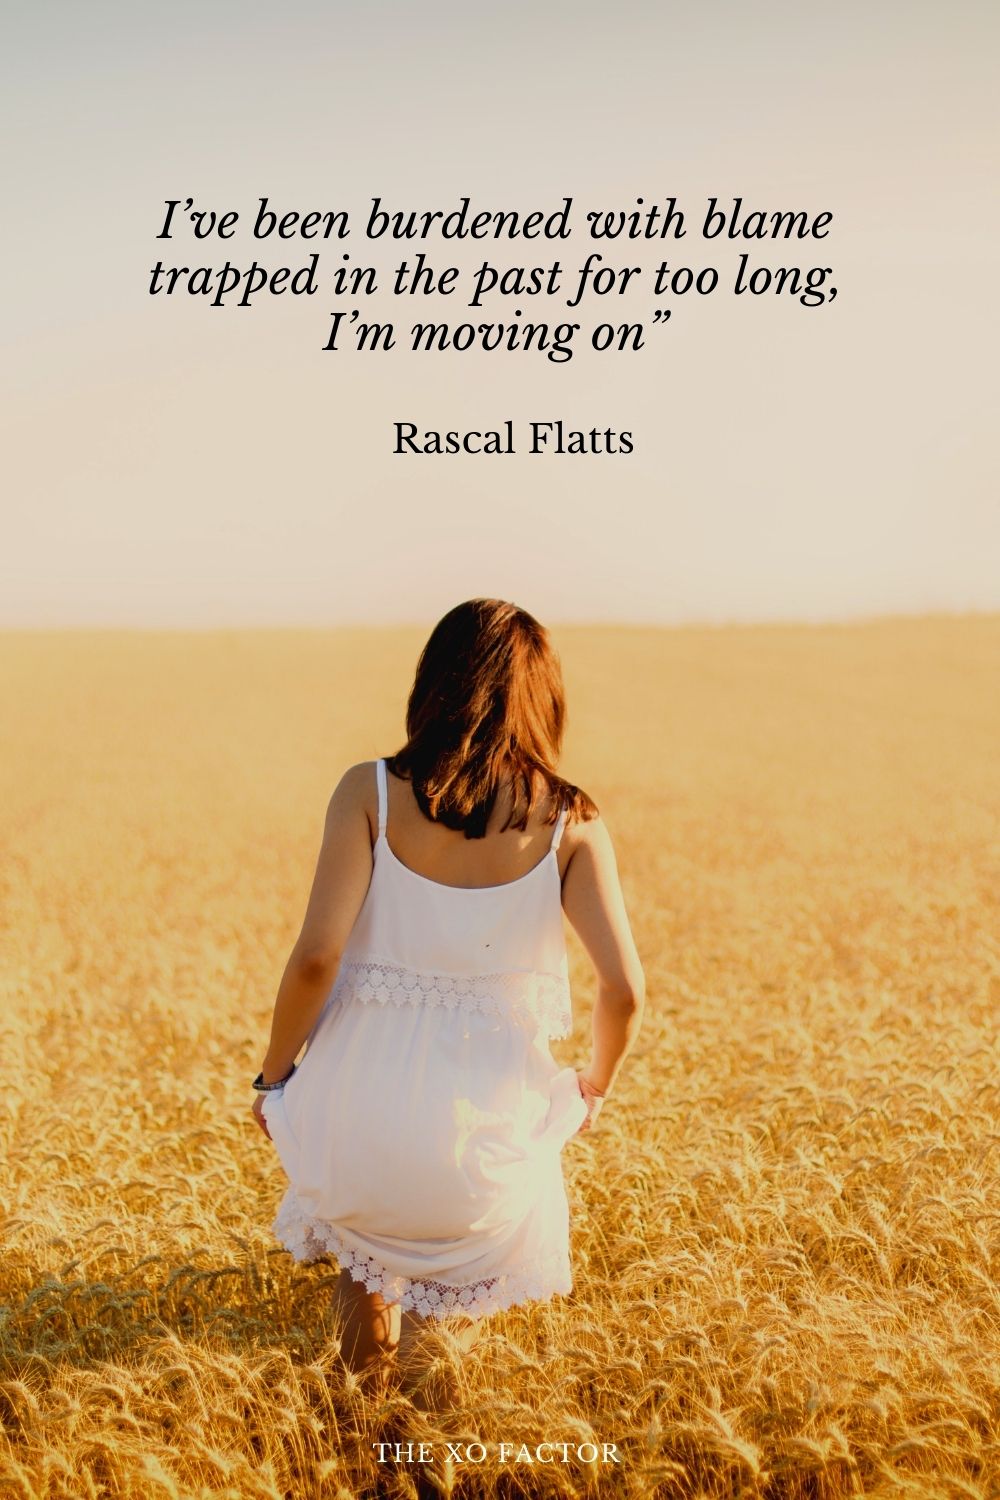 I’ve been burdened with blame trapped in the past for too long, I’m moving on” Rascal Flatts